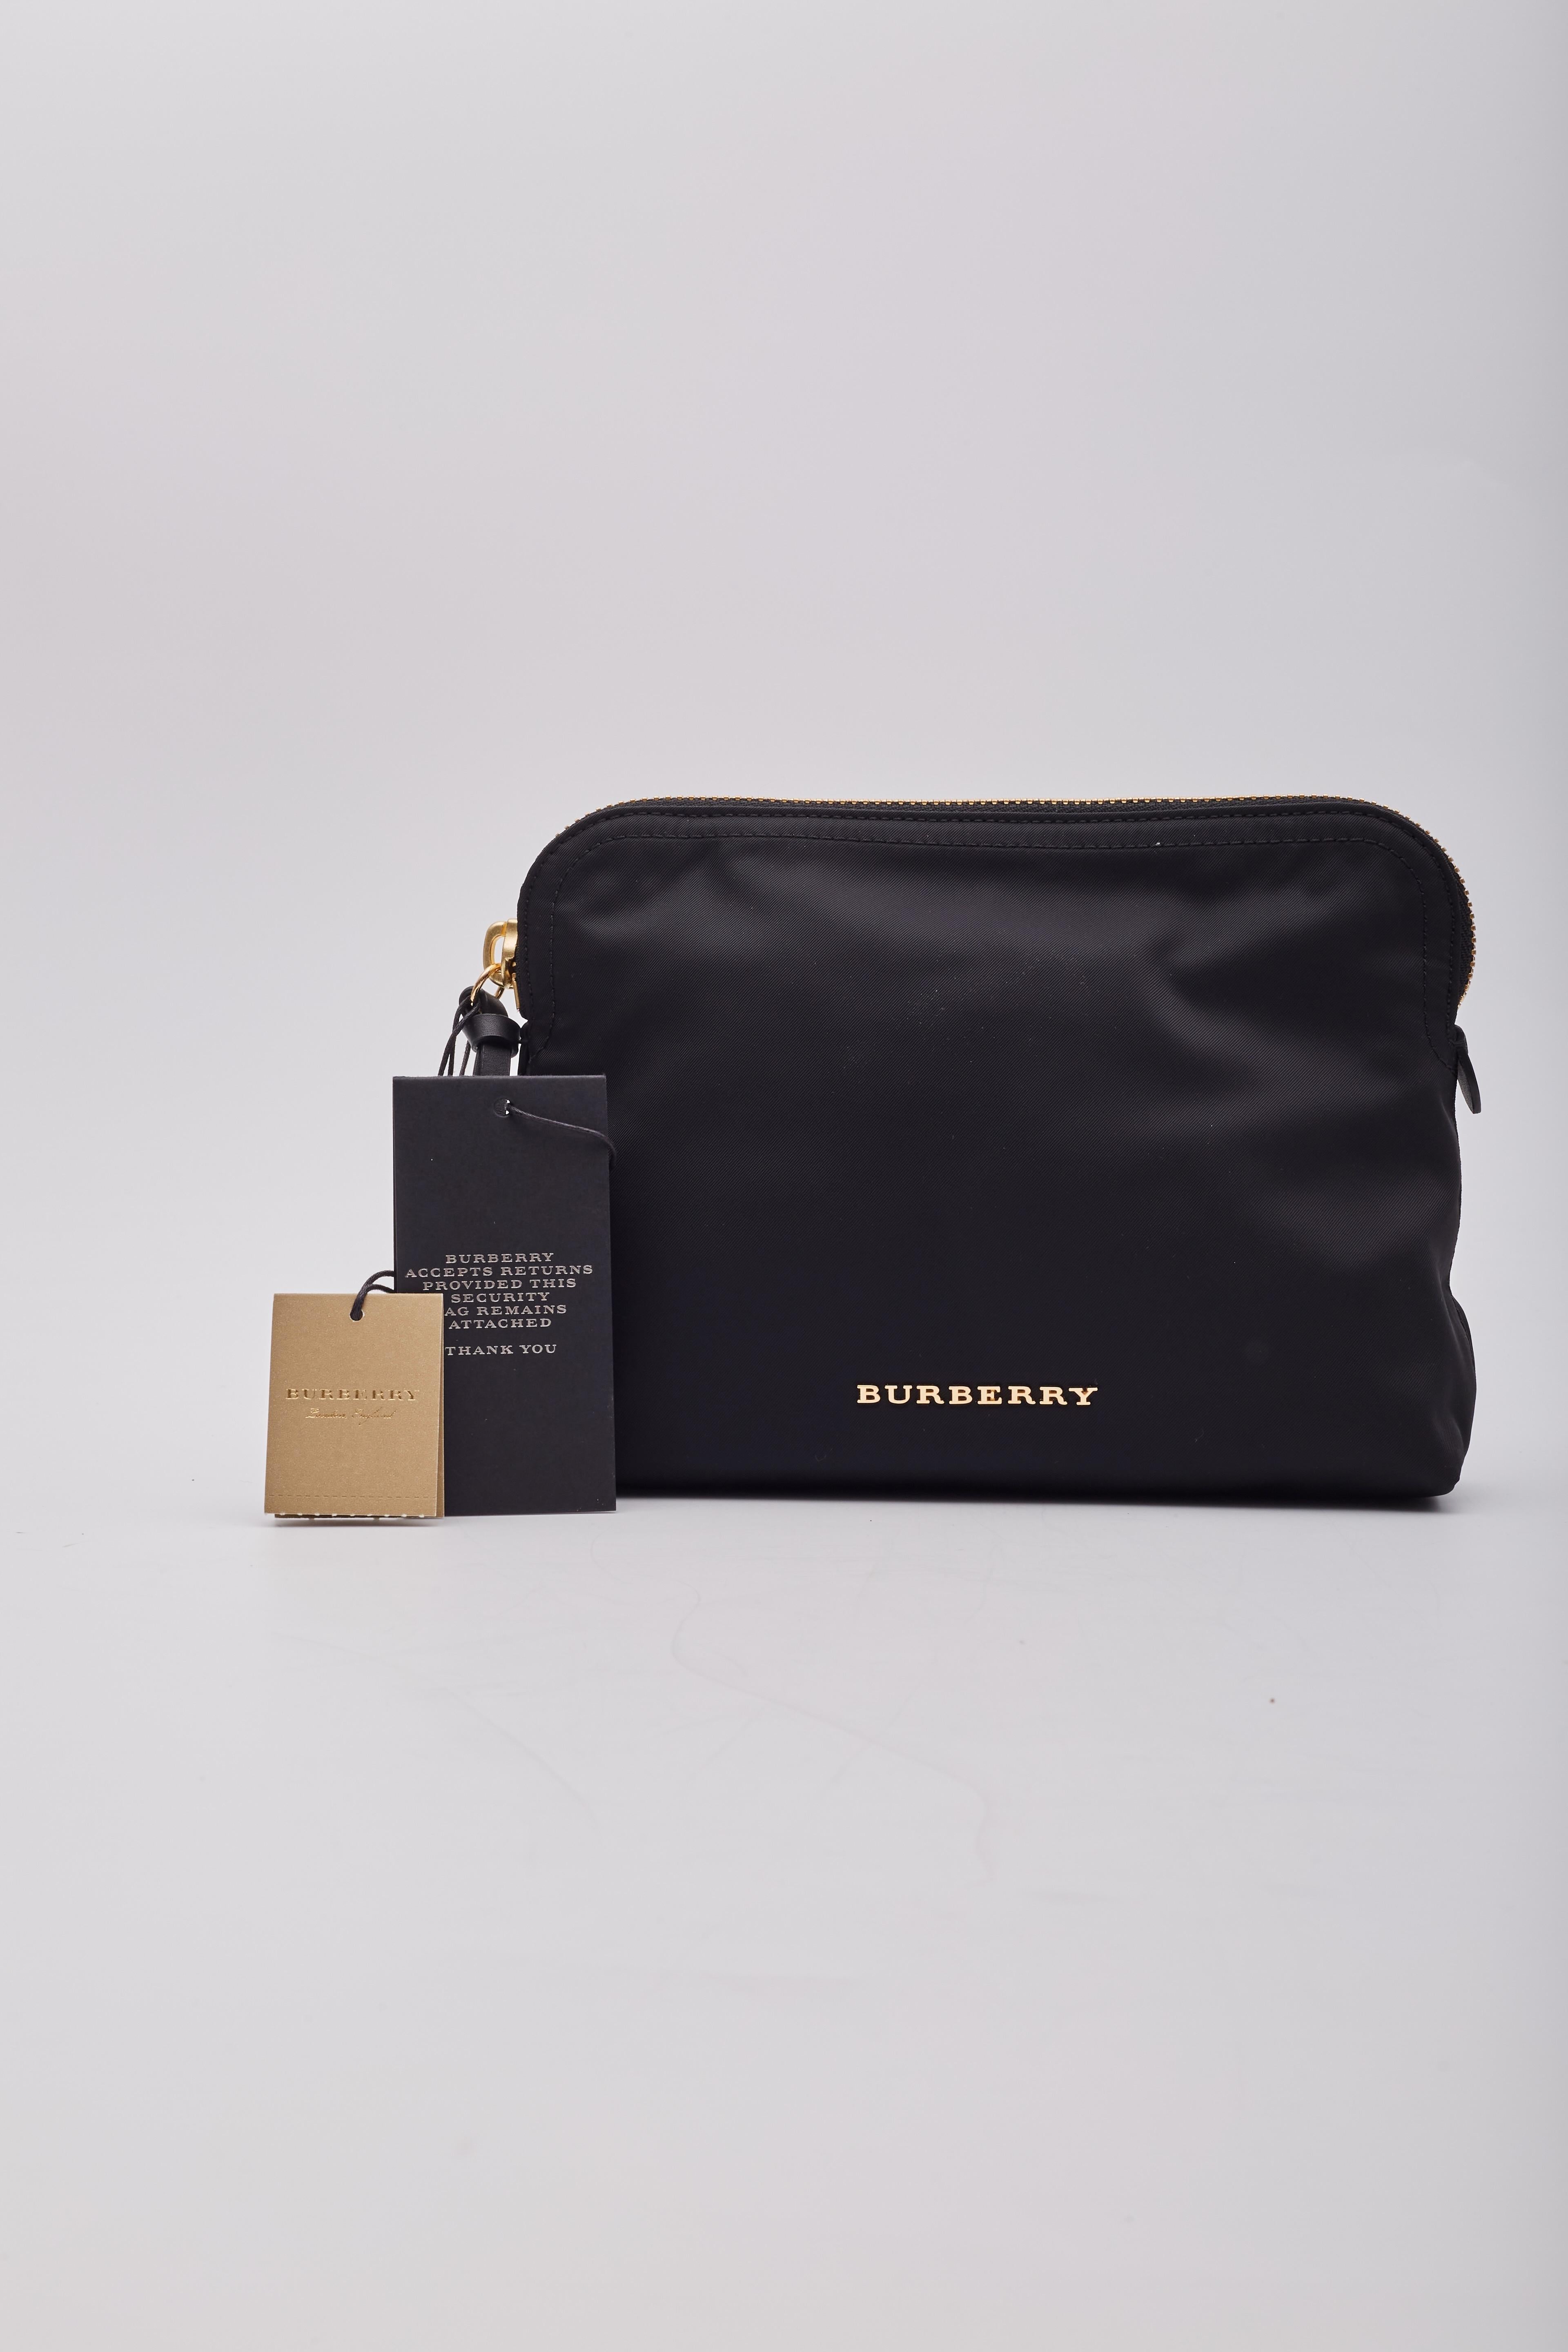 Burberry Black Nylon Technical Vanity Pouch Small For Sale 1